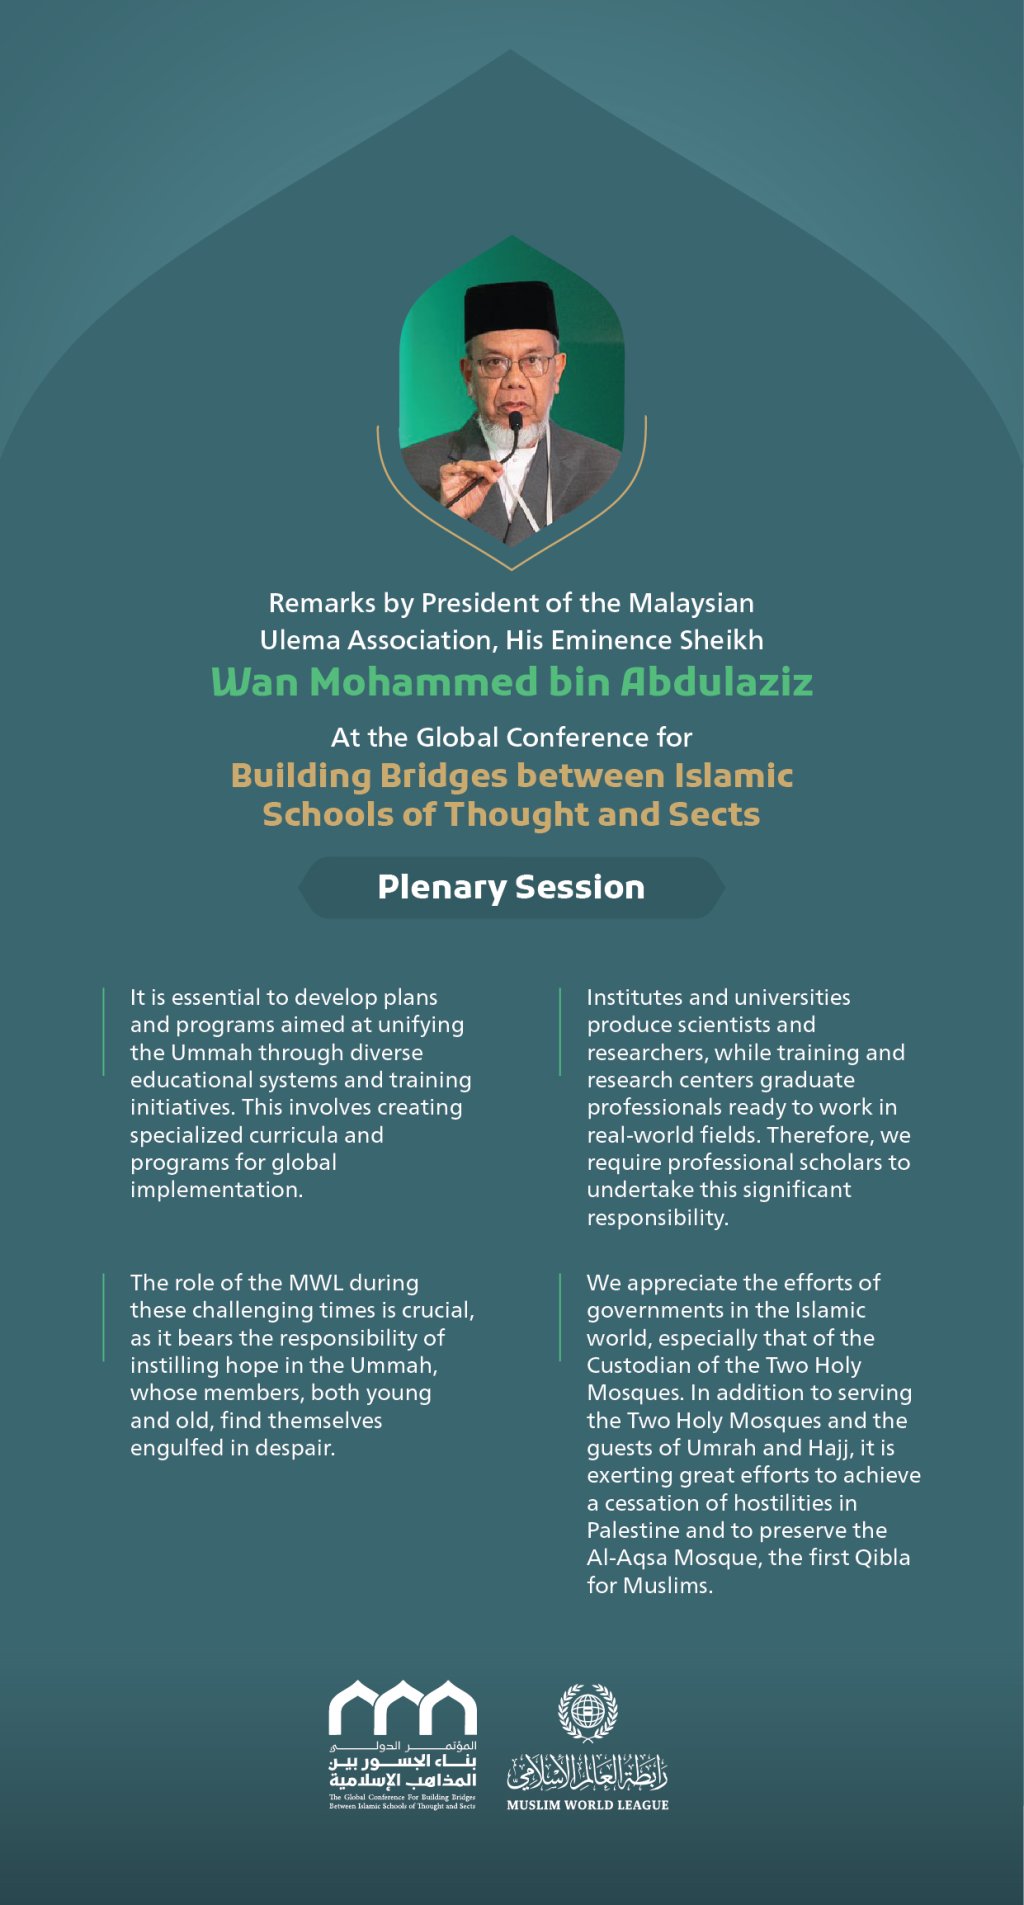 “Instilling hope in the Ummah,” Remarks by His Eminence Sheikh Wan Mohammed bin Abdulaziz, President of the Malaysian Ulema ‎Association at the Global Conference for Building Bridges between Islamic Schools of Thought and Sects.